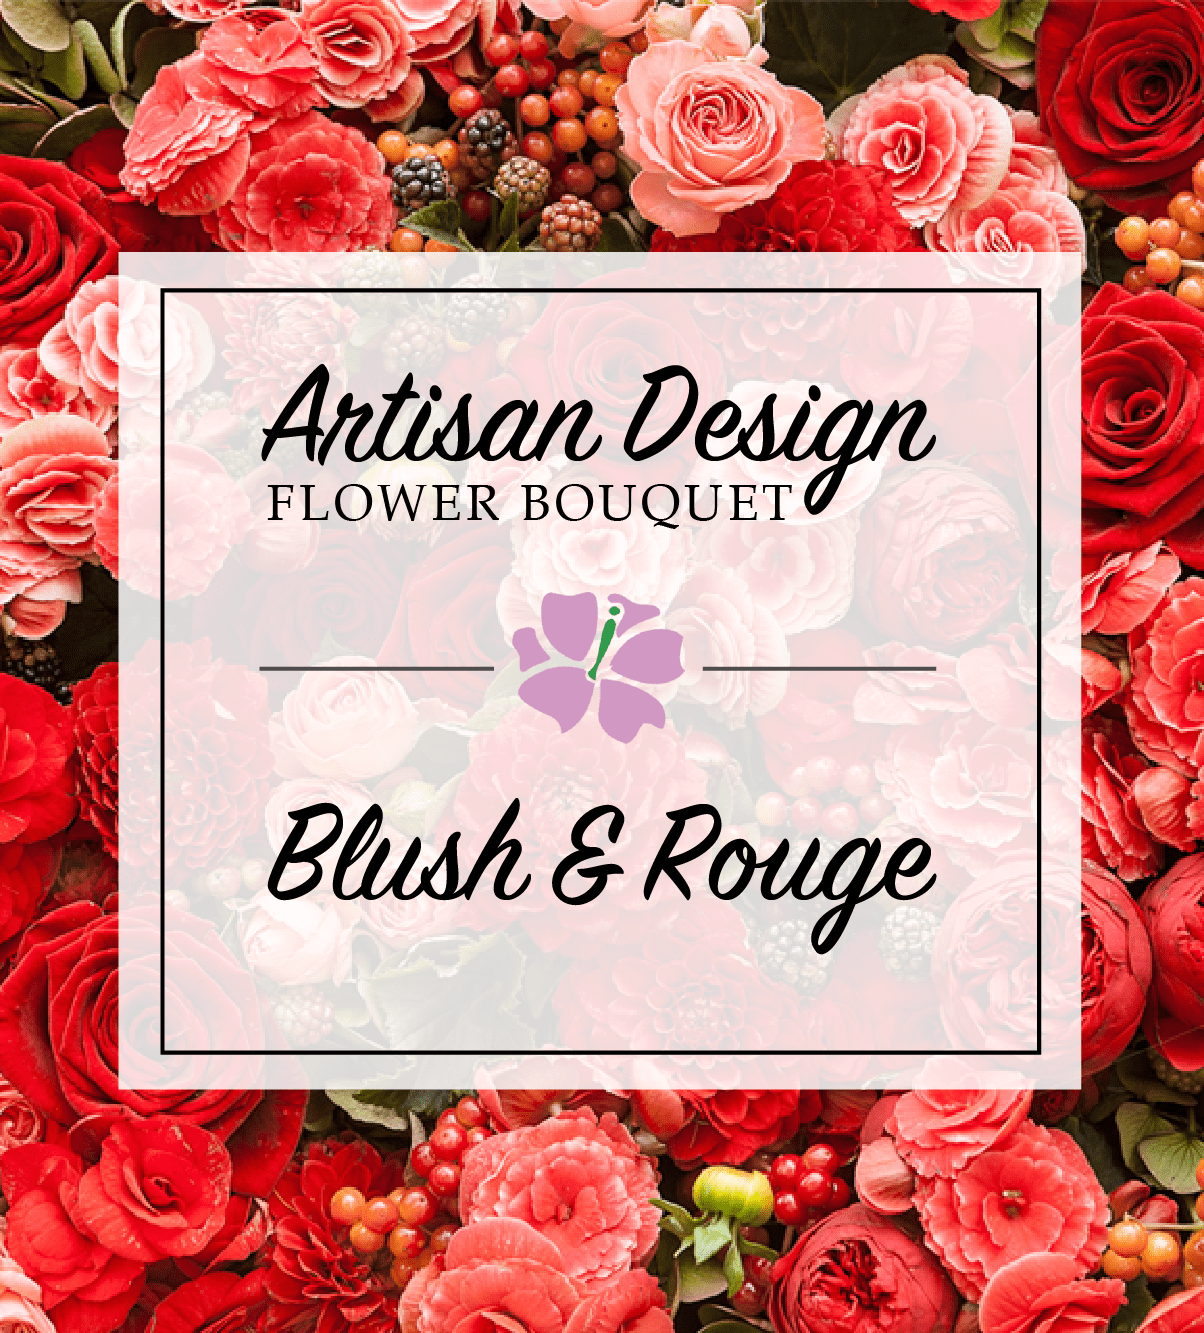 Artist's Design: Blush and Rouge